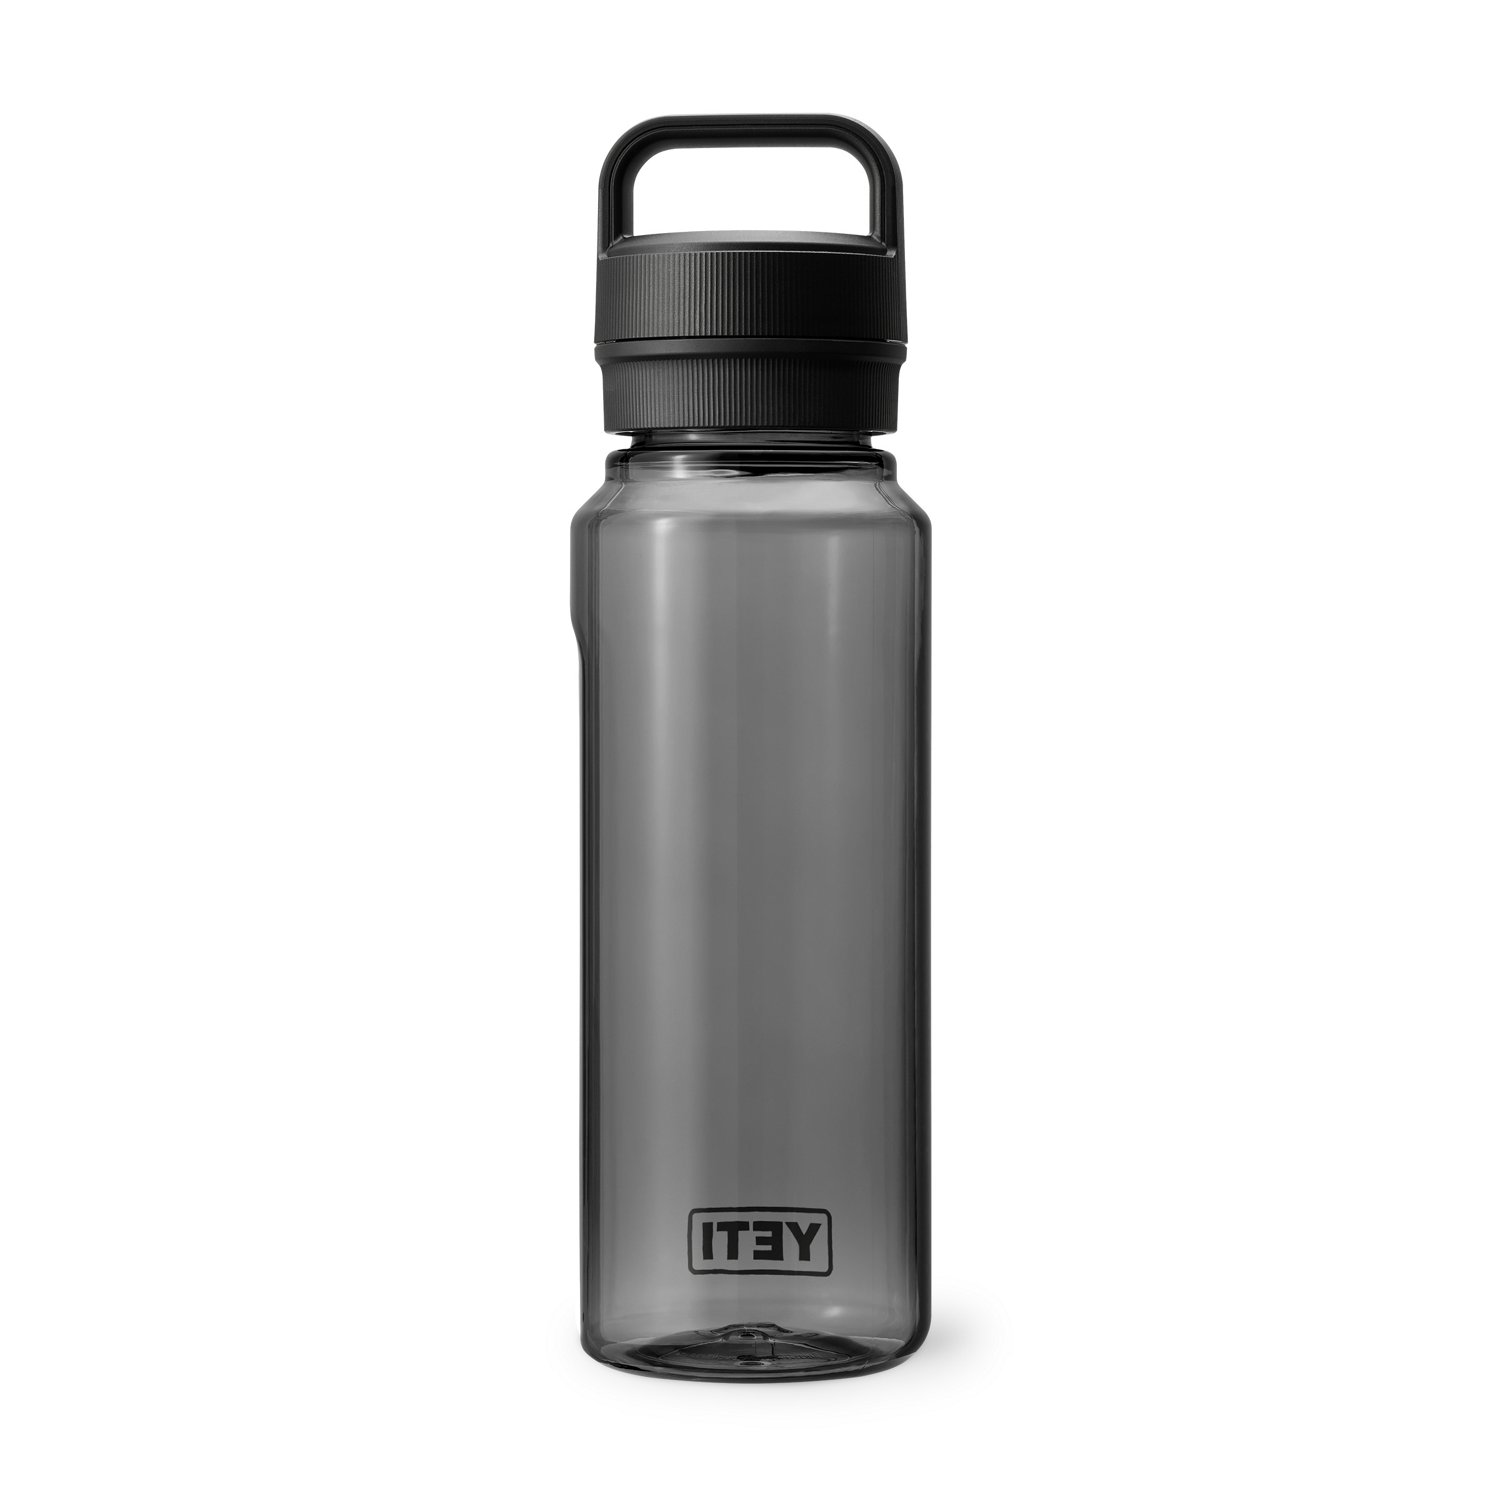 https://academy.scene7.com/is/image/academy//drinkware/yeti-yonder-1l-water-bottle-21071220005-black/8e52b144ee2f4688b658955ce99c5a17?$pdp-mobile-gallery-ng$